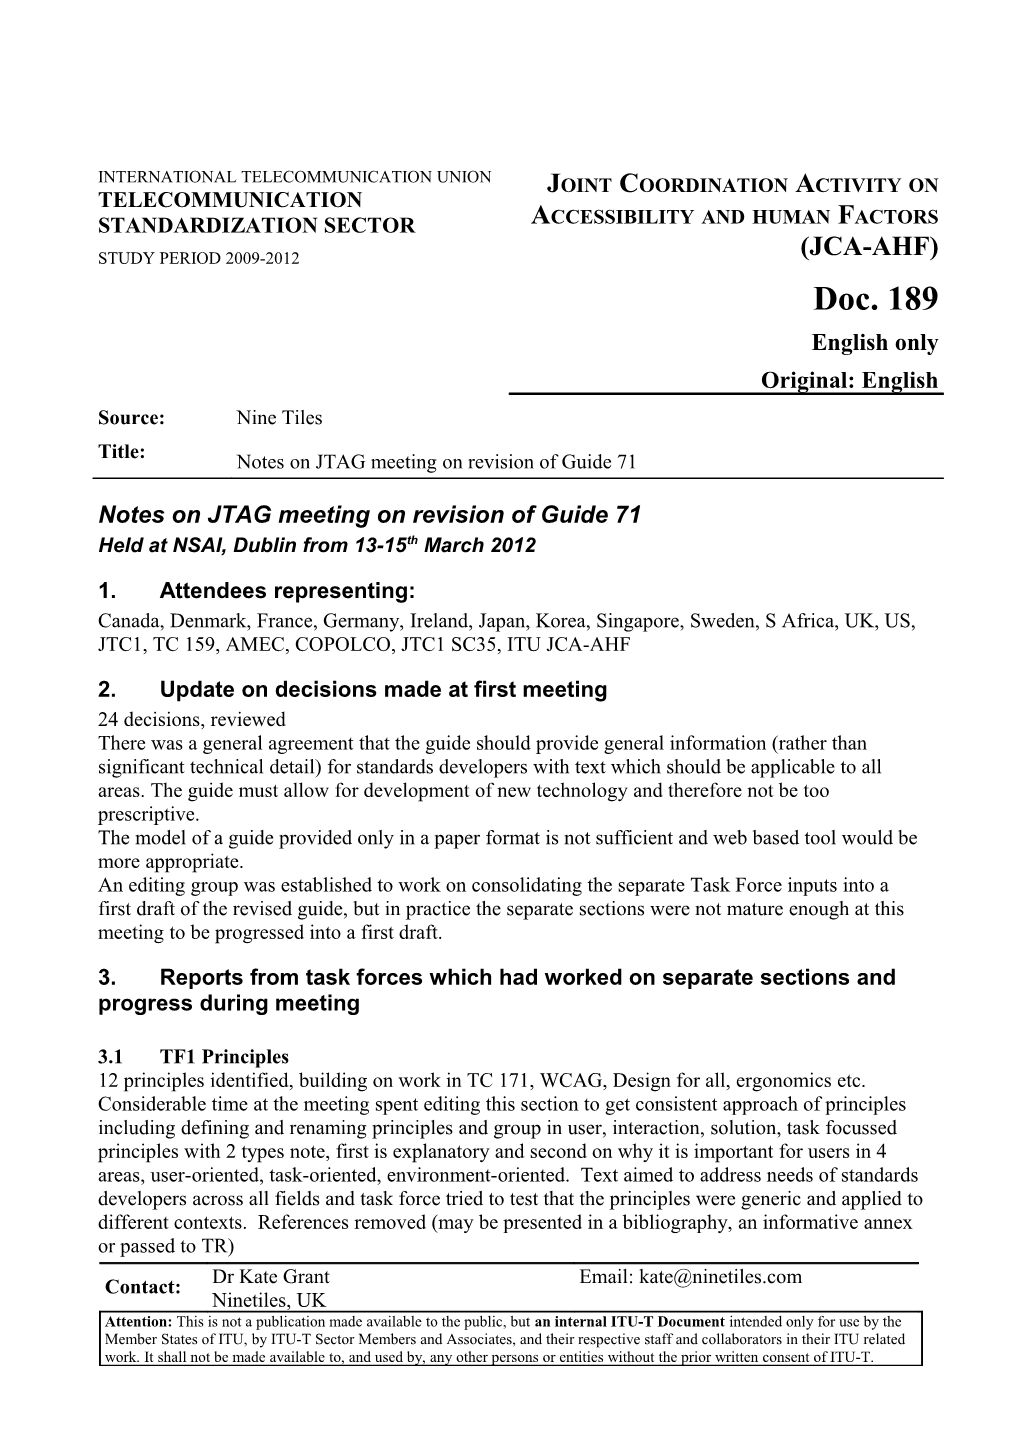 Notes on JTAG Meeting on Revision of Guide 71